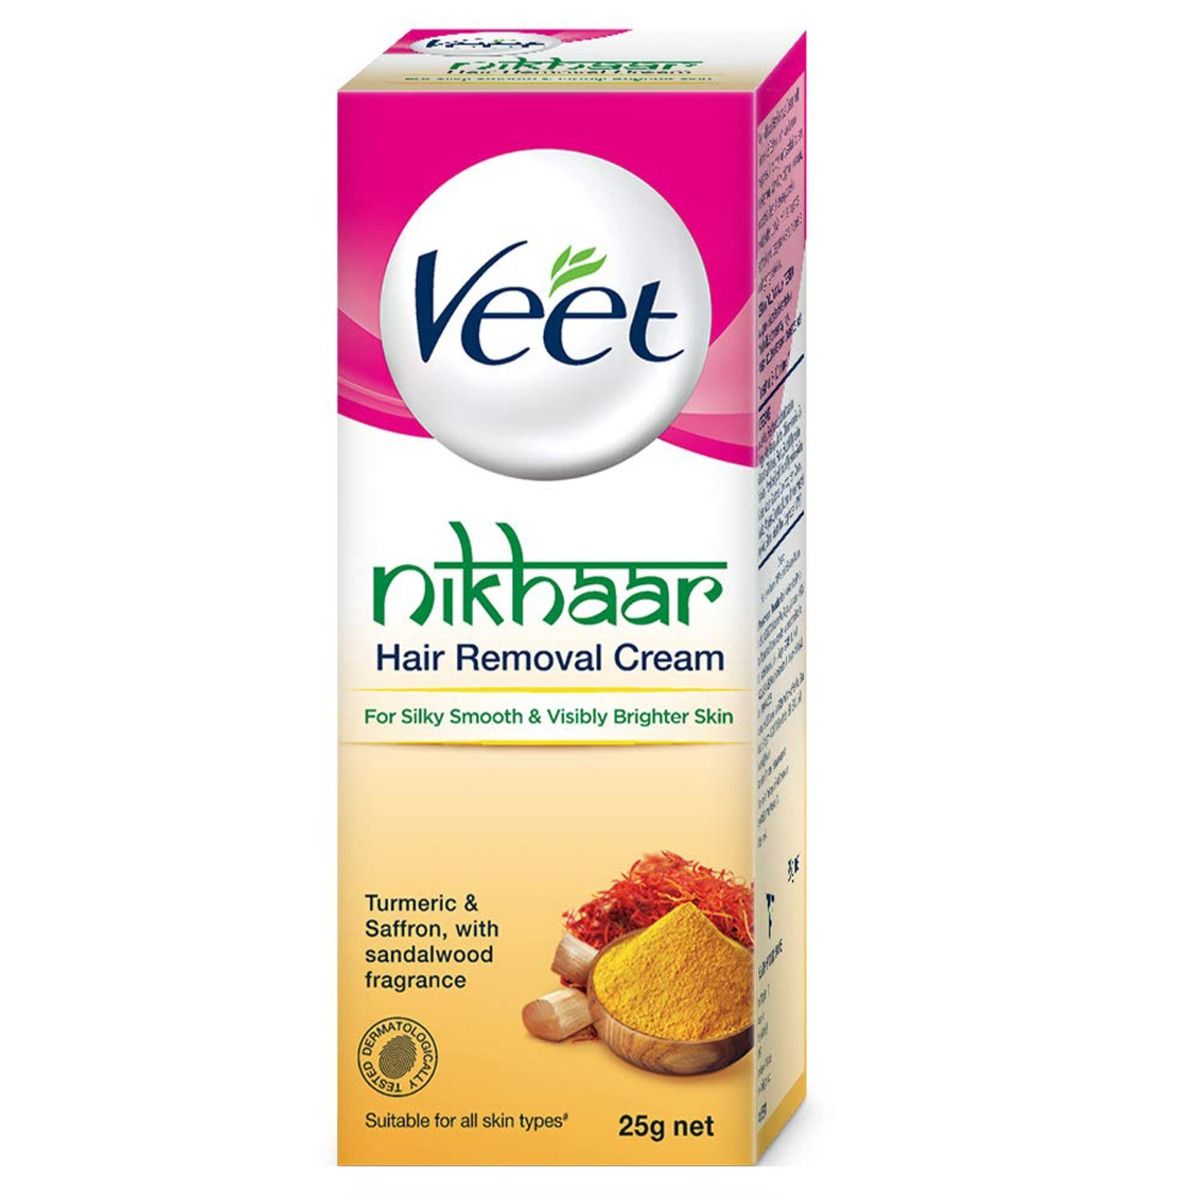 Veet Nikhaar Hair Removal Cream, 25 gm Price, Uses, Side Effects,  Composition - Apollo Pharmacy